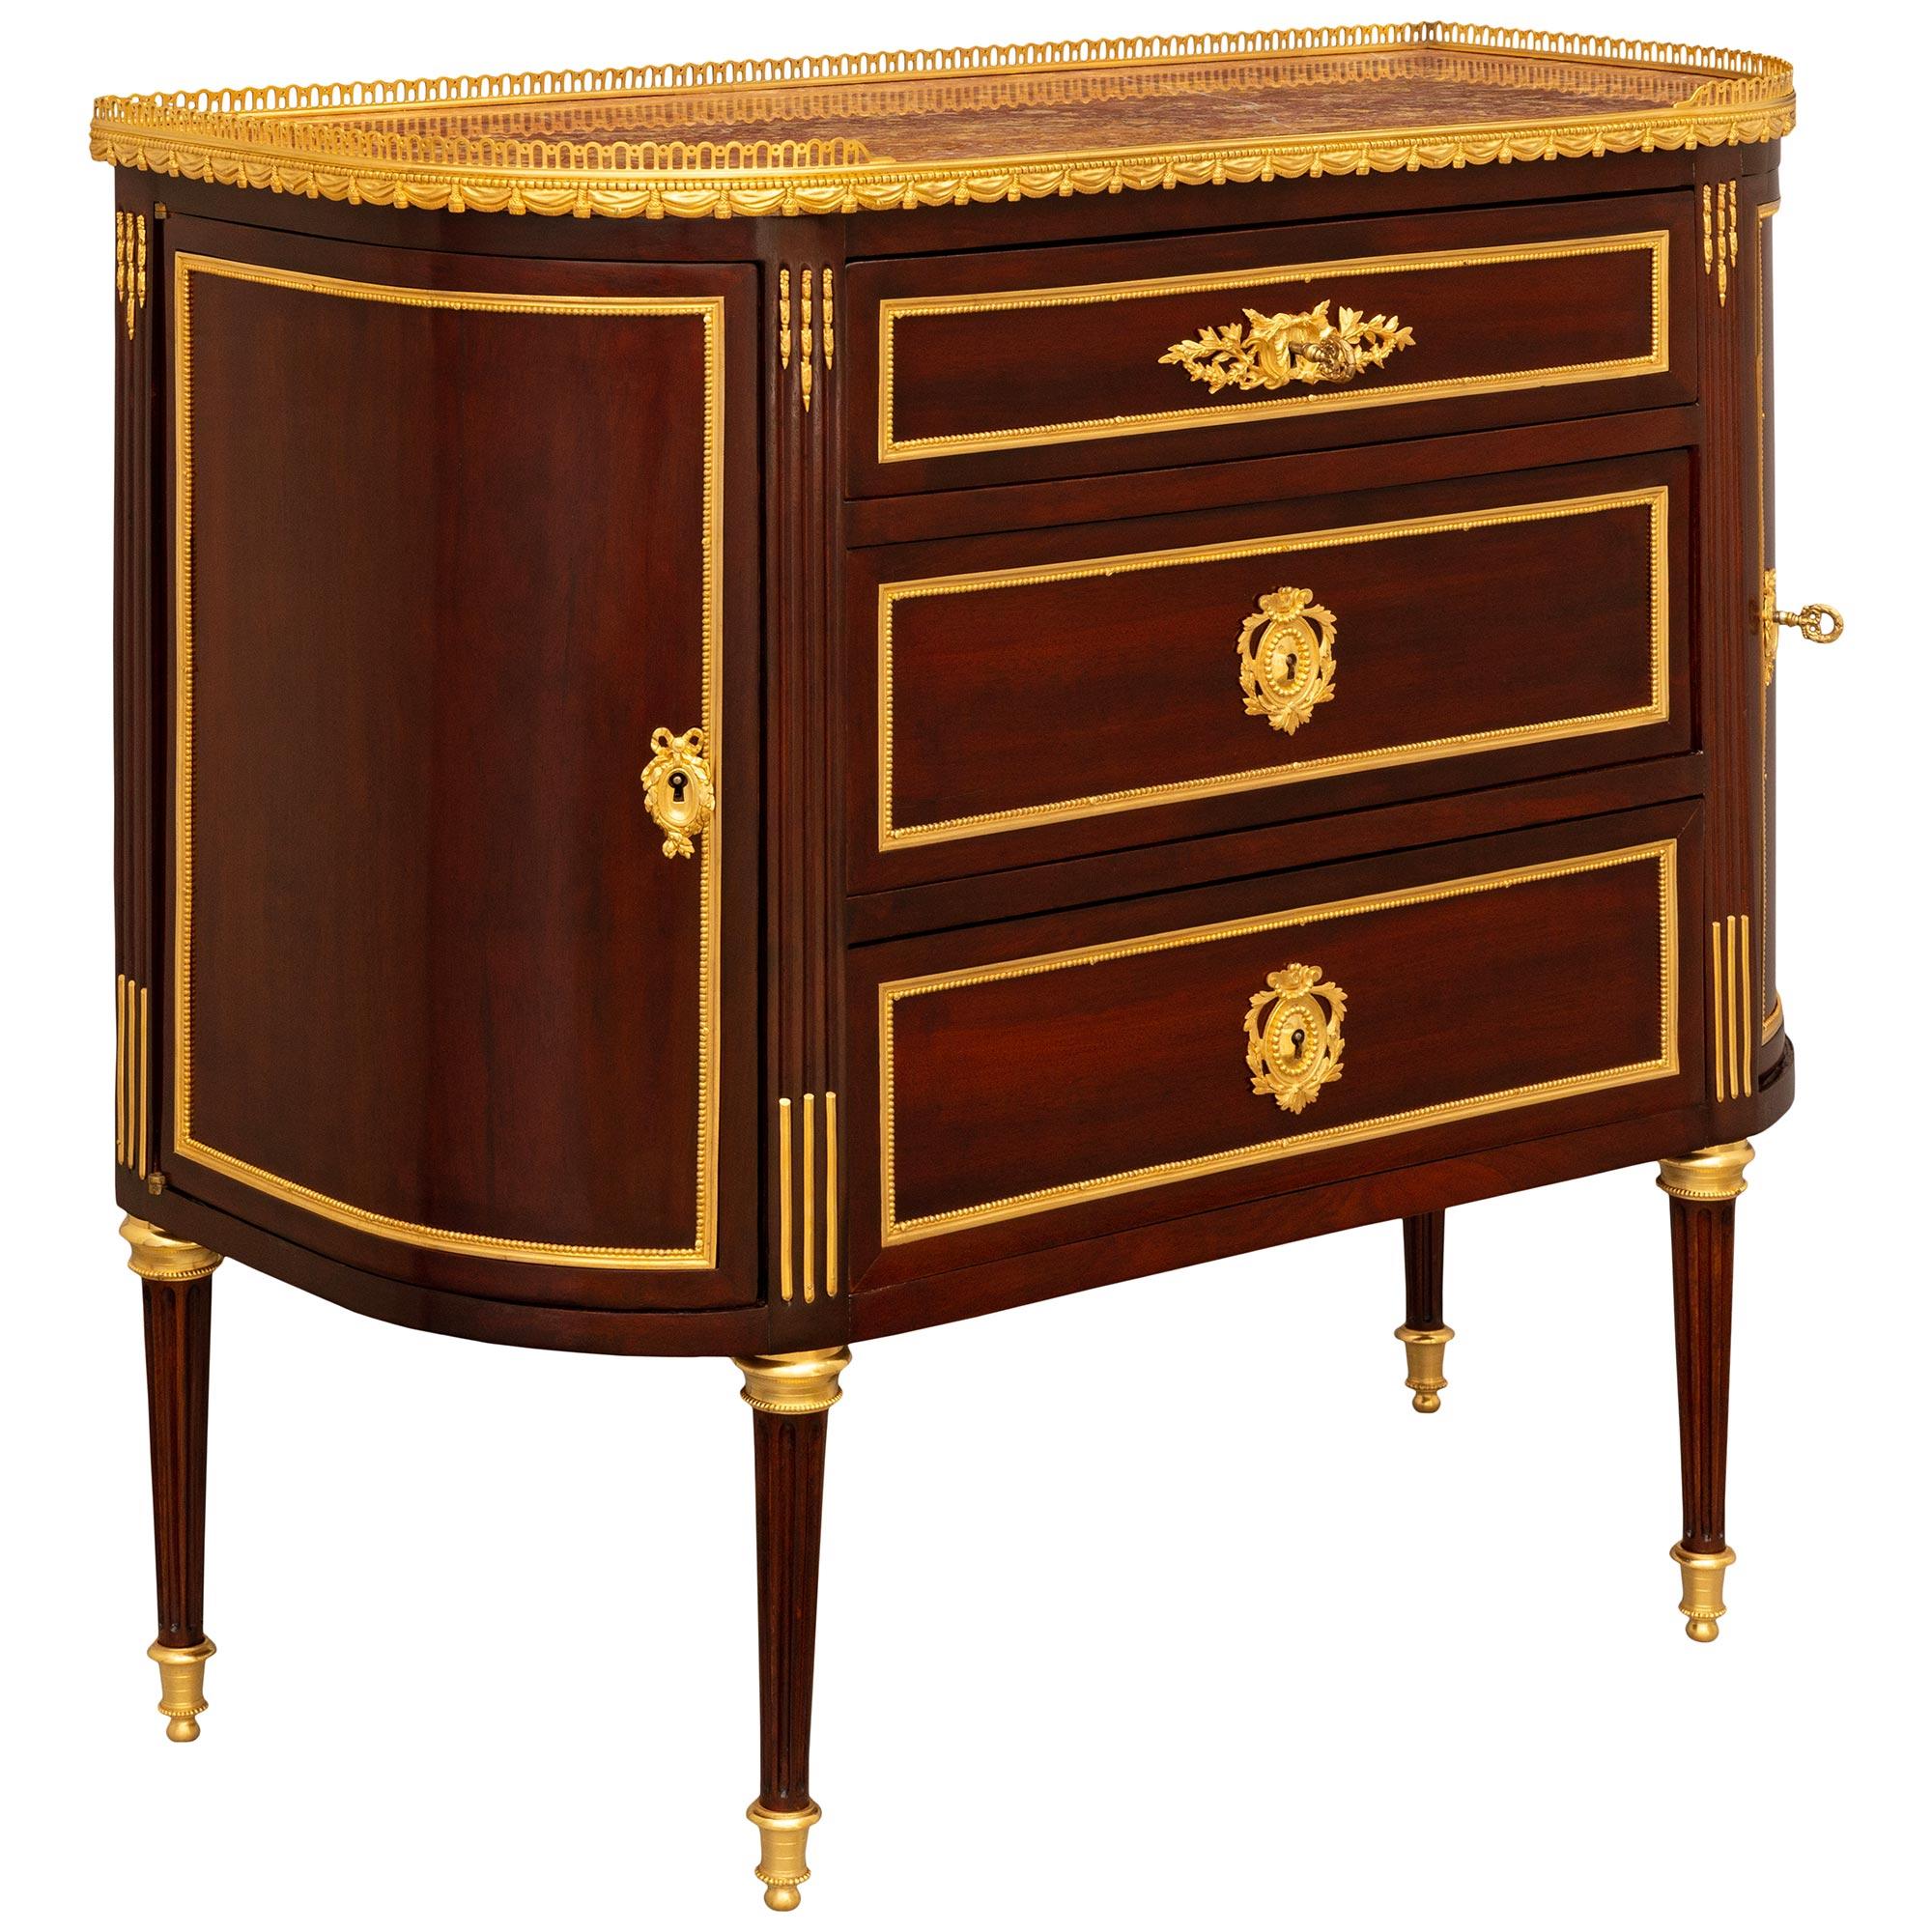 A most elegant and high quality French 19th century Louis XVI st. Mahogany, Ormolu and Lumachella marble commode. This beautifully designed 